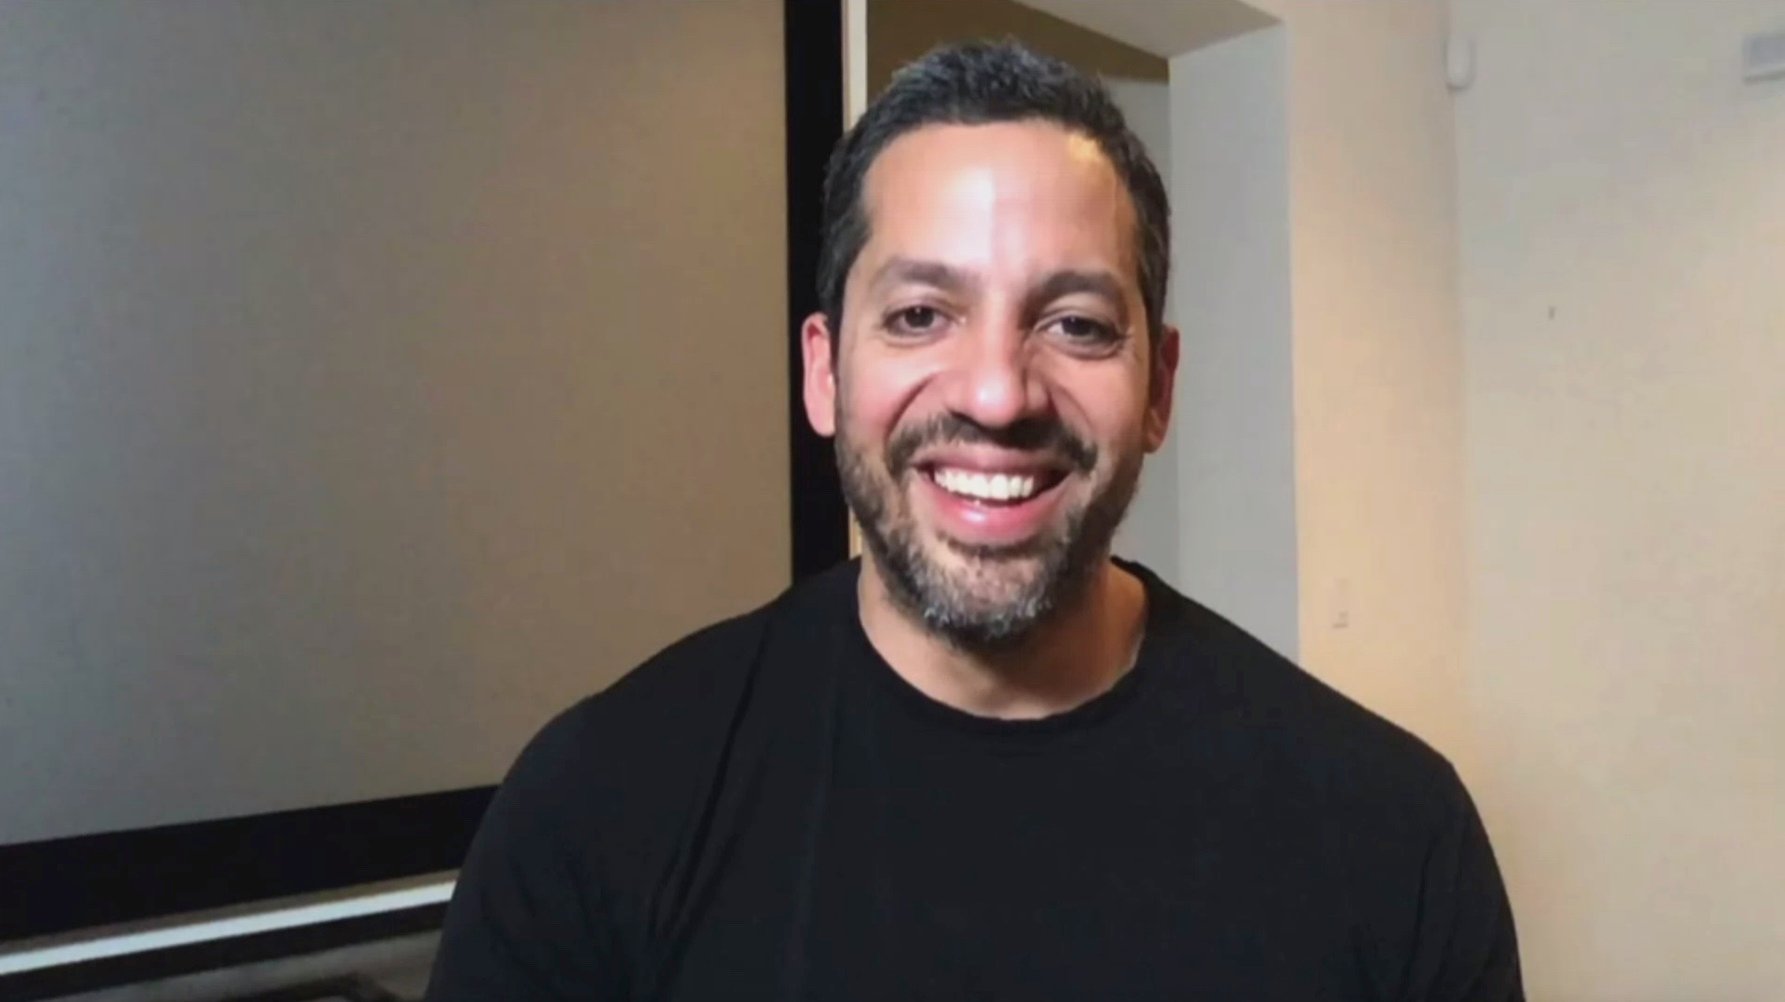 David Blaine on Zoom for The Late Late Show with James Corden